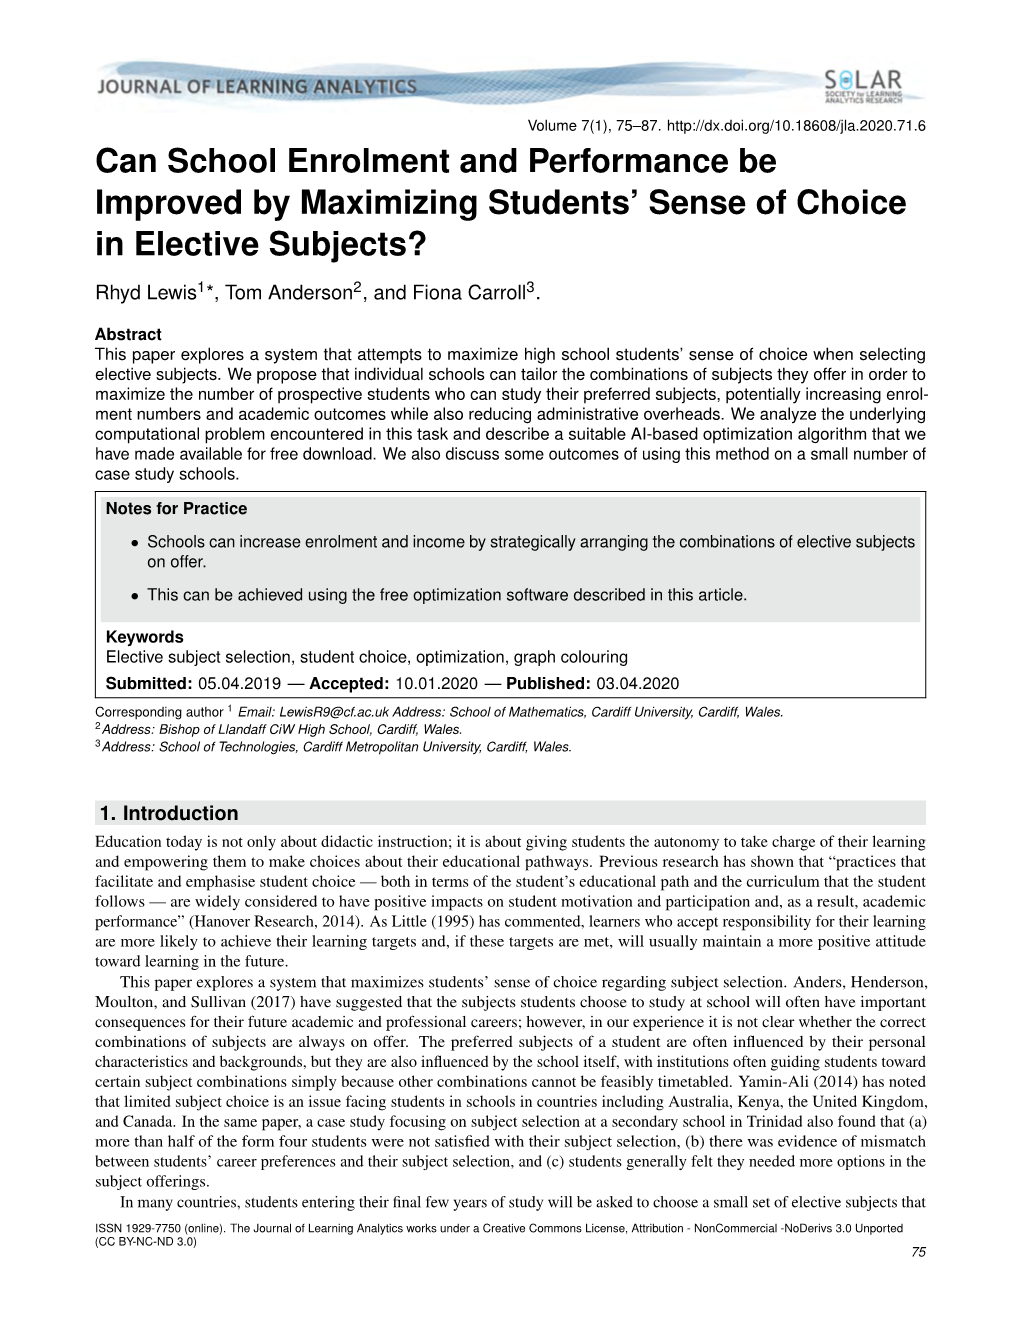 Can School Enrolment and Performance Be Improved by Maximizing Students’ Sense of Choice in Elective Subjects?